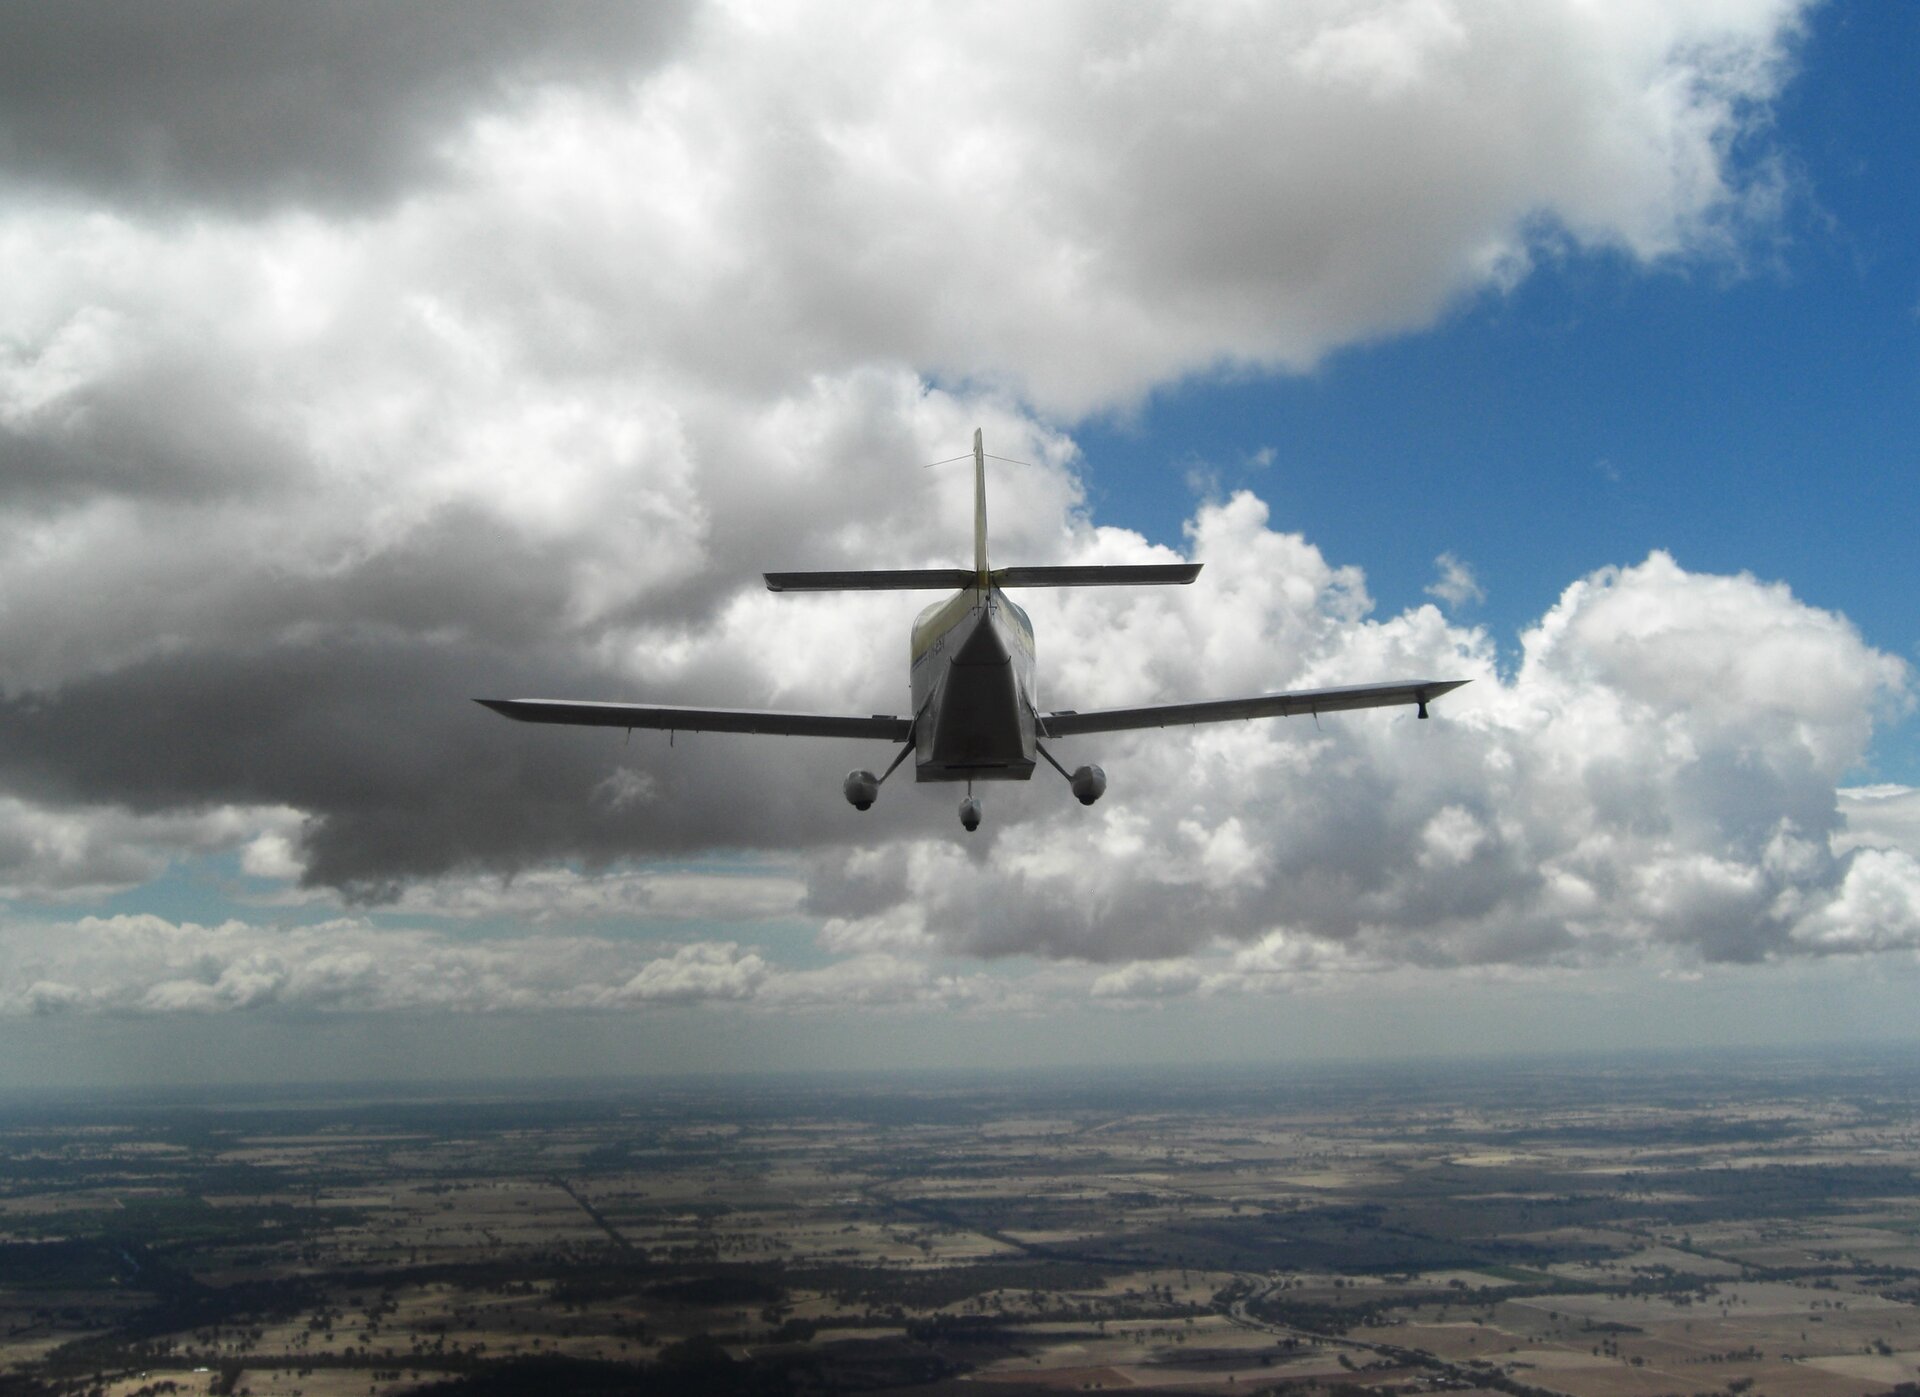 Aircraft mapping microwave emissions